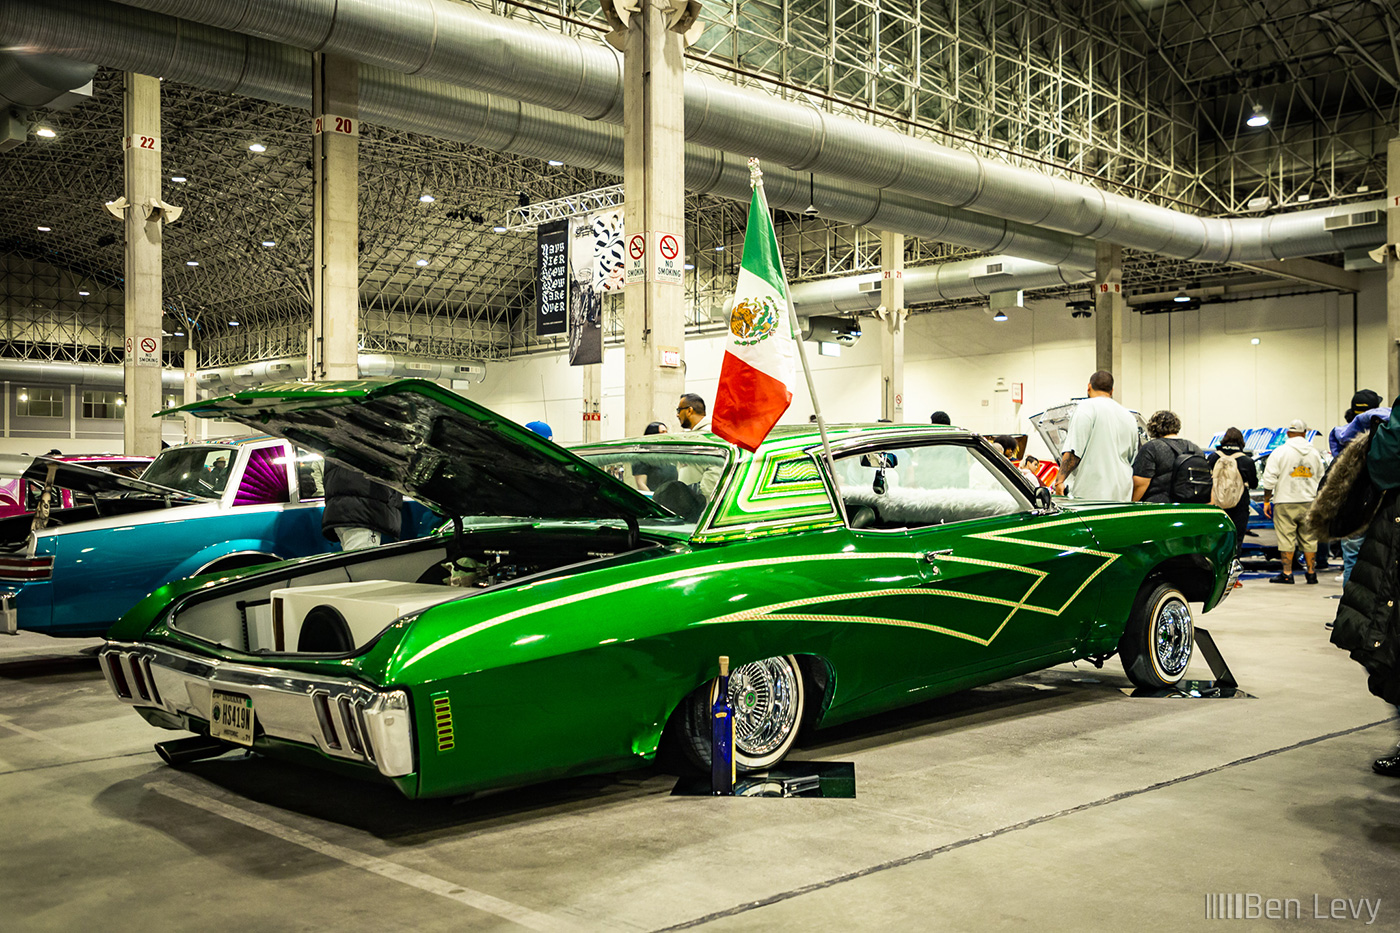 Green Low Rider Caprice at Car Show in Chicago